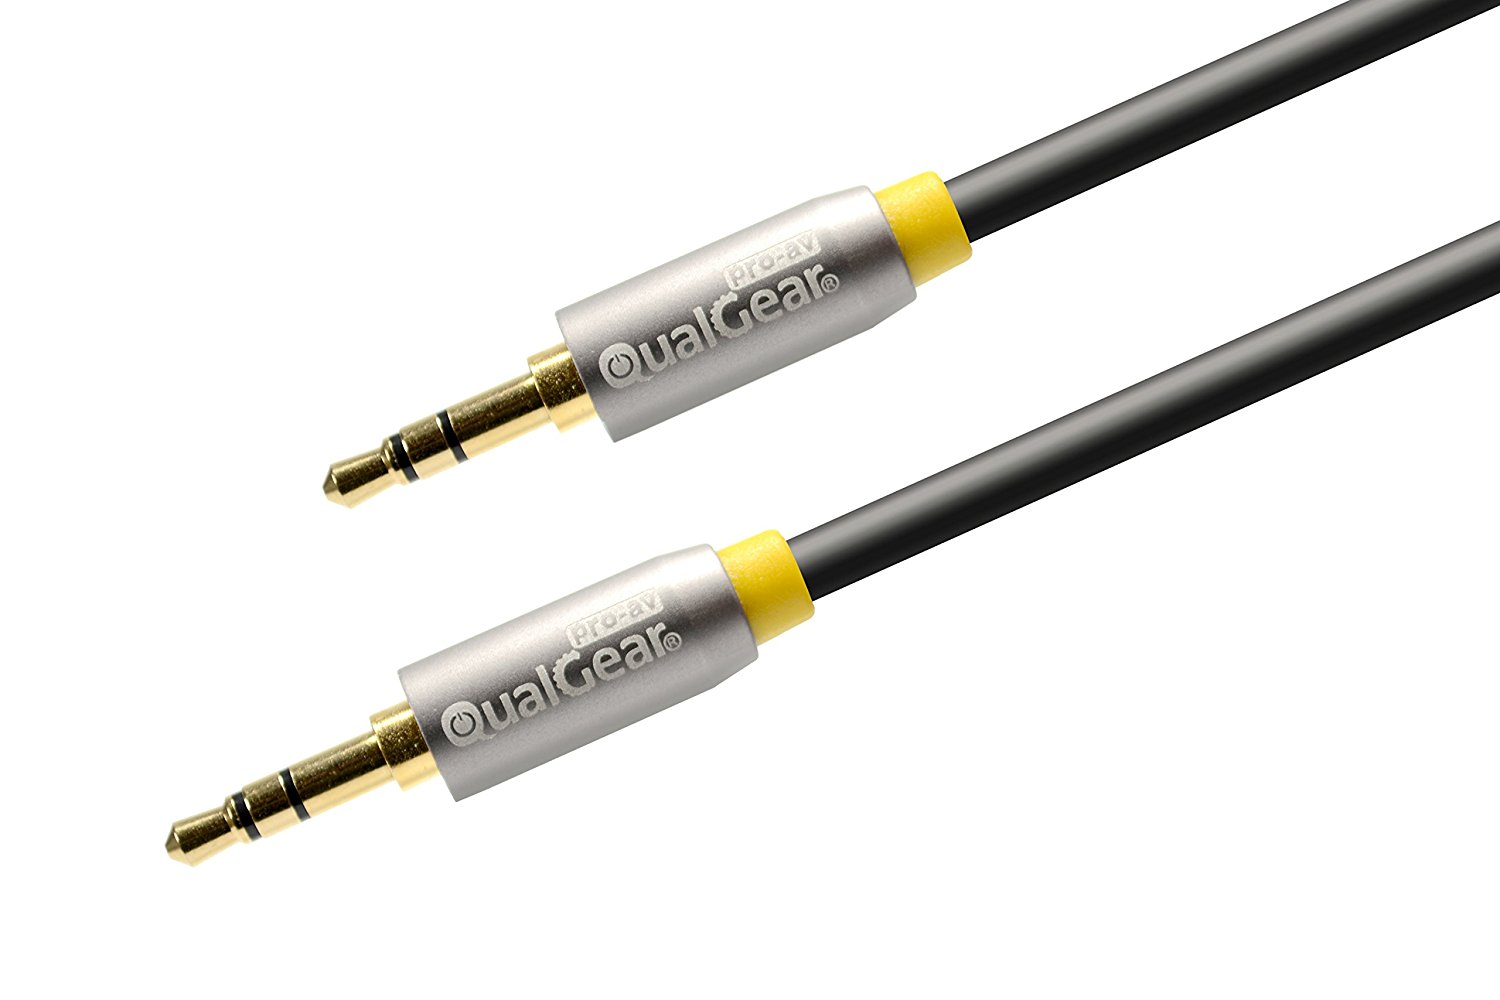 QualGear 100% OFC Copper, Gold Plated Contacts, 3.5mm Male to 3.5mm Male Premium Auxiliary Stereo Audio Cable - 3.5mm Male to 3.5mm Male - 4' Black (QG-ACBL-4FT)